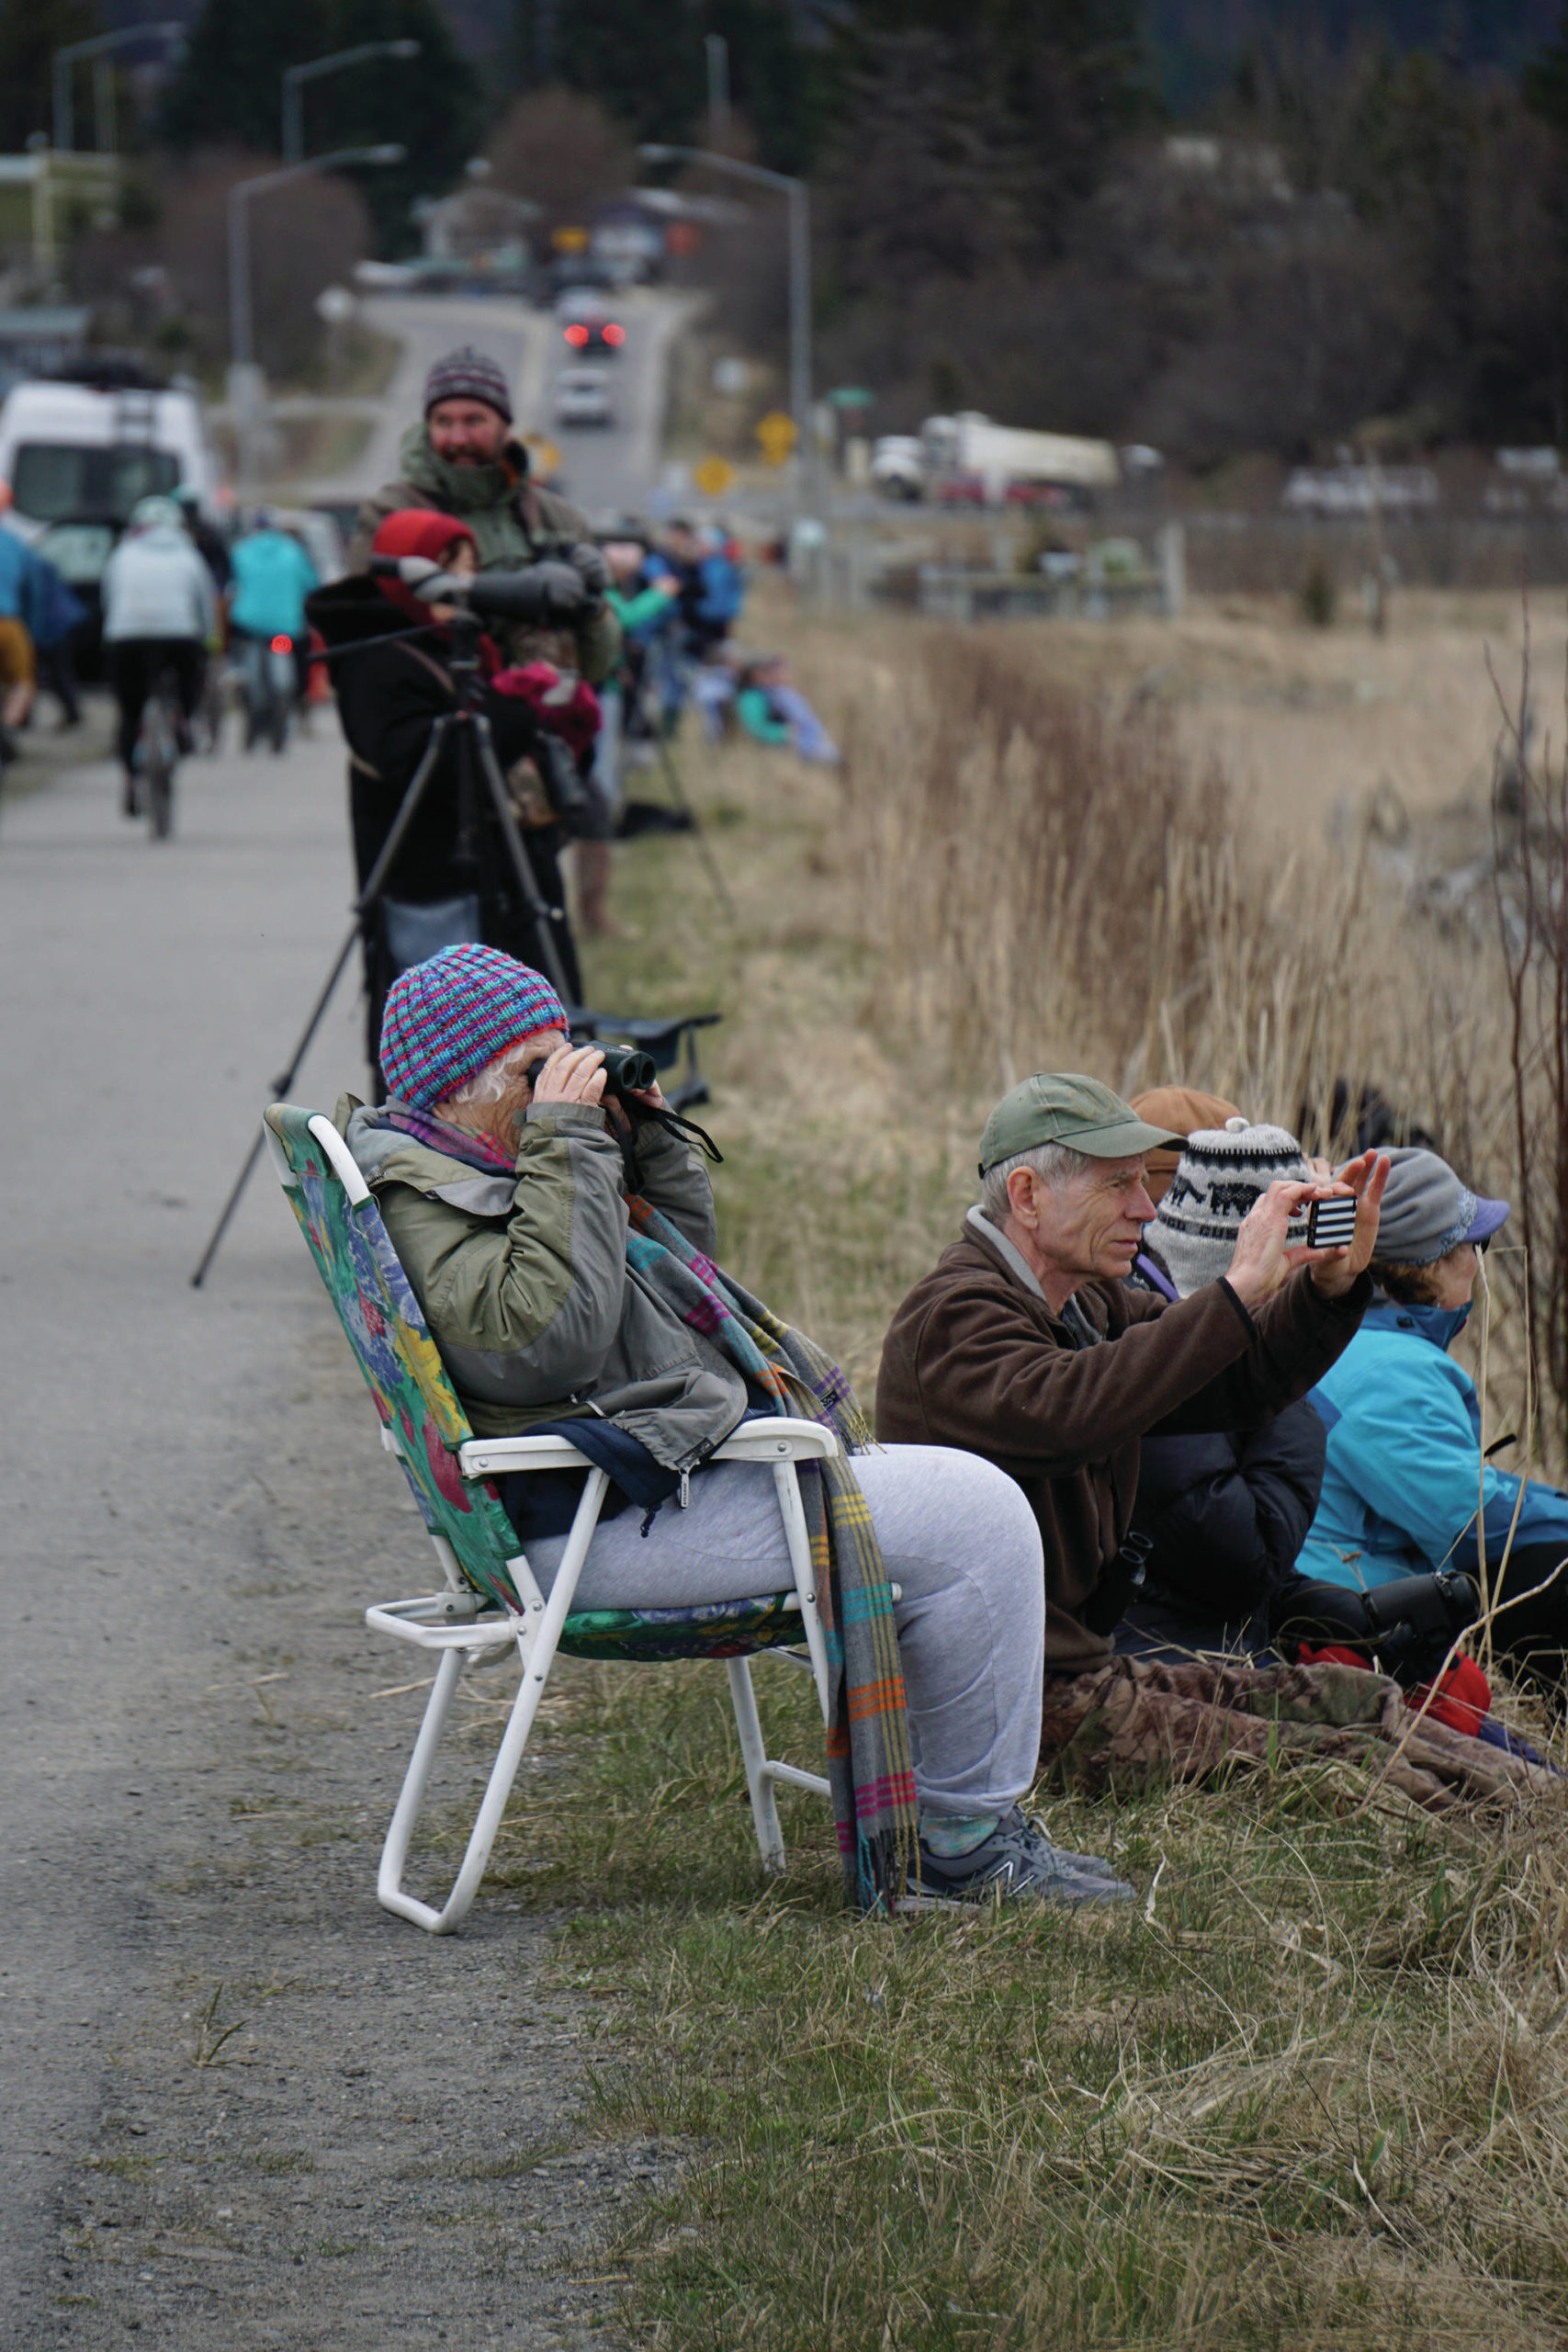 Birders check out shorebirds on the outgoing tide on Saturday, May 8, 2021, at Mud Bay on the Homer Spit in Homer, Alaska. (Photo by Michael Armstrong/Homer News)